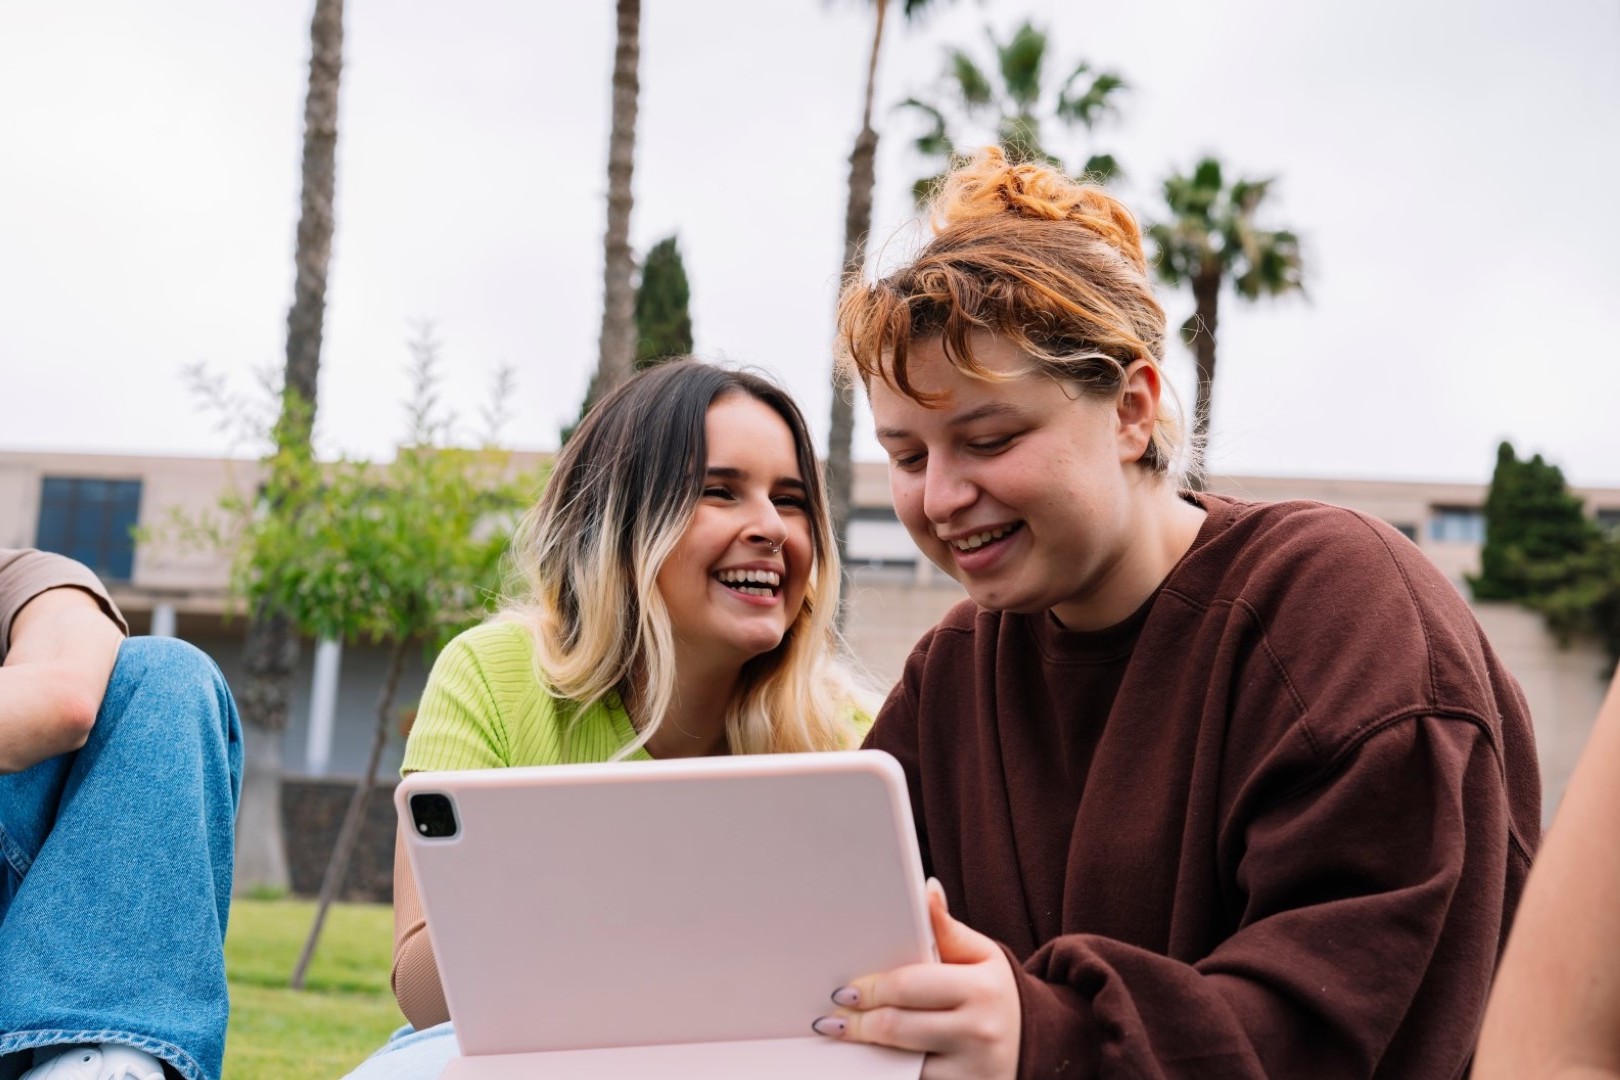 Two women smile while looking at a tablet screen